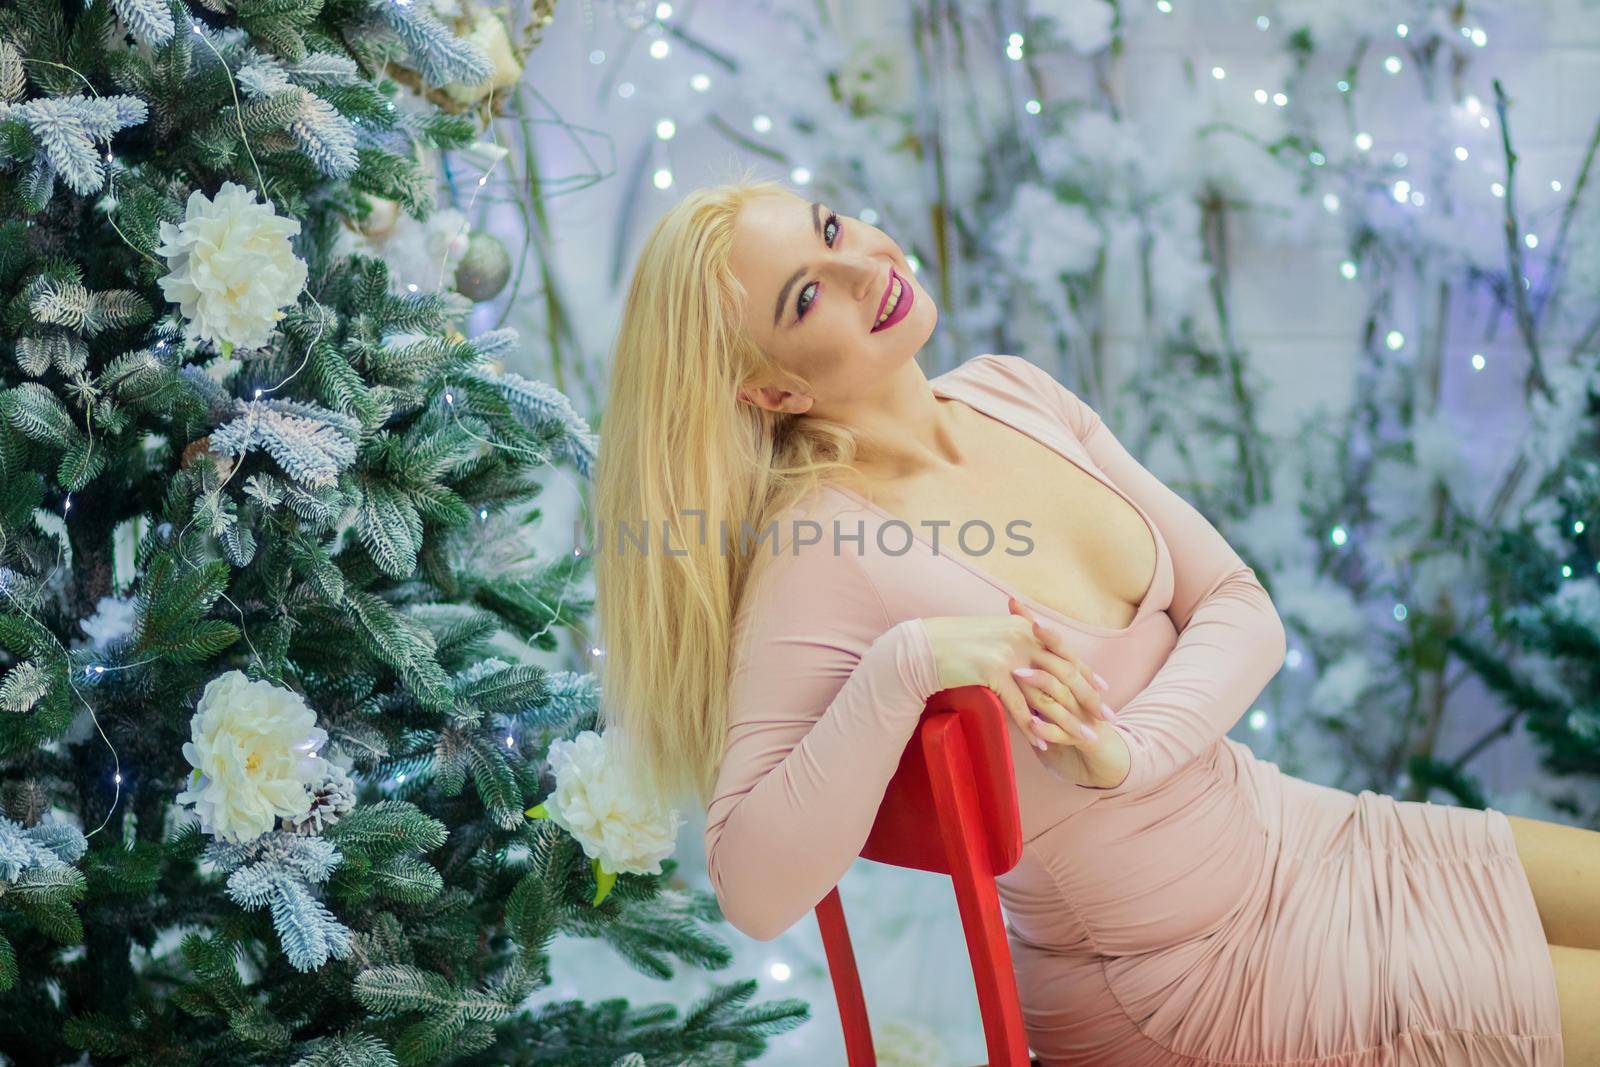 Charming blonde woman in beige sexy dress sitting on red chair, over background with Christmas tree. Christmas and New Year photo.